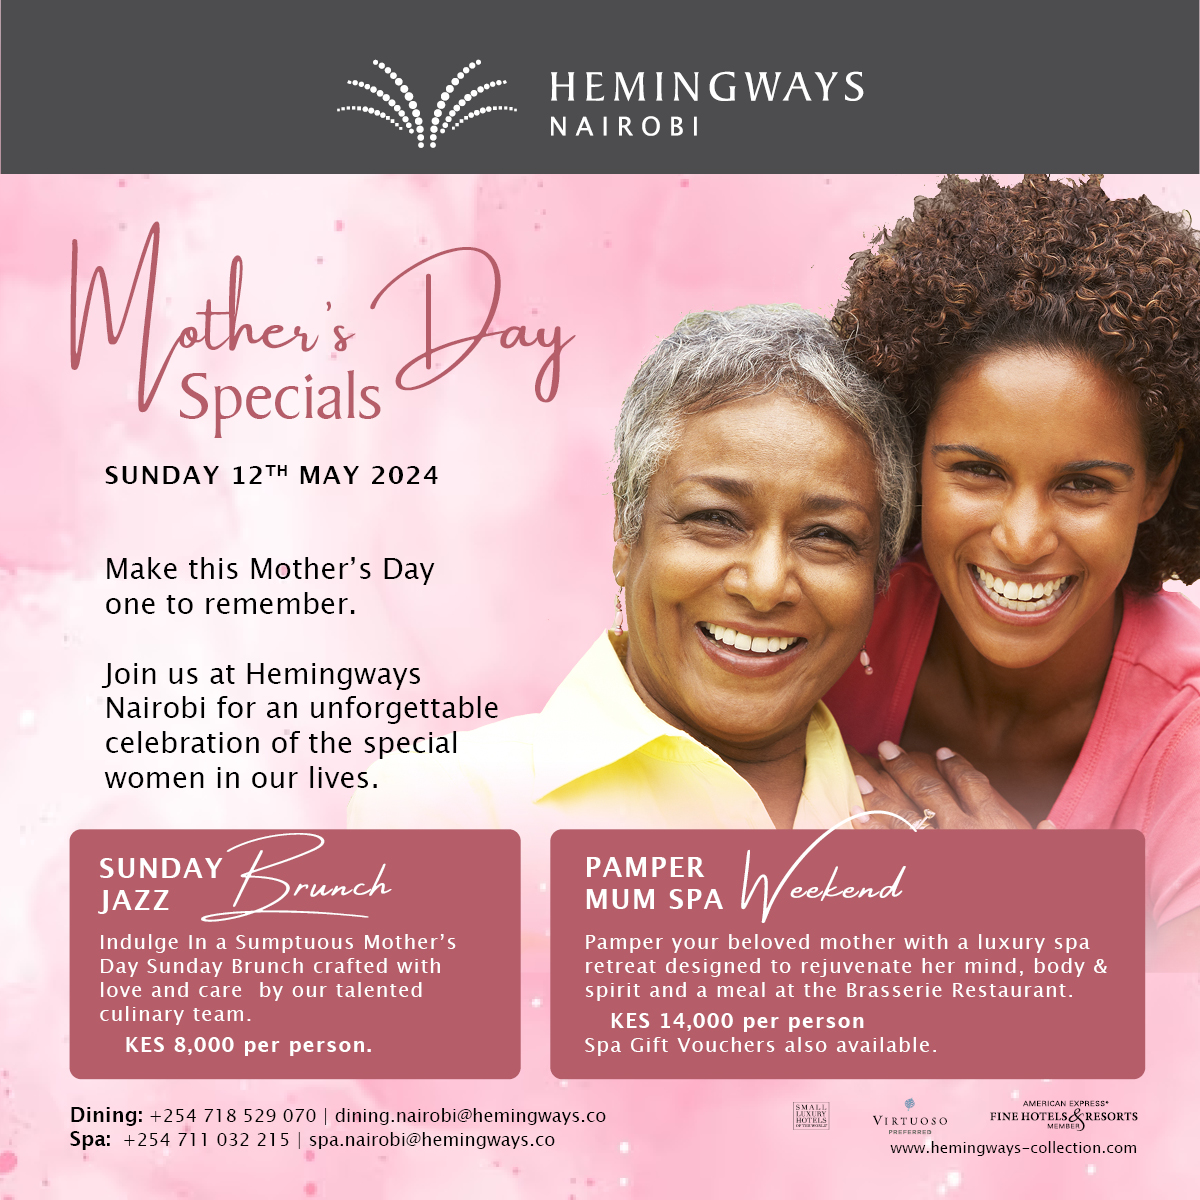 Moms make our world a brighter place. This Mother’s Day, show your mom, big sister, aunt, or that treasured friend how much you value her, and treat her to our special brunch or indulgent spa treatments... #CelebrateMothersdayinstyle #MothersDayOffers #HemingwaysNairobi